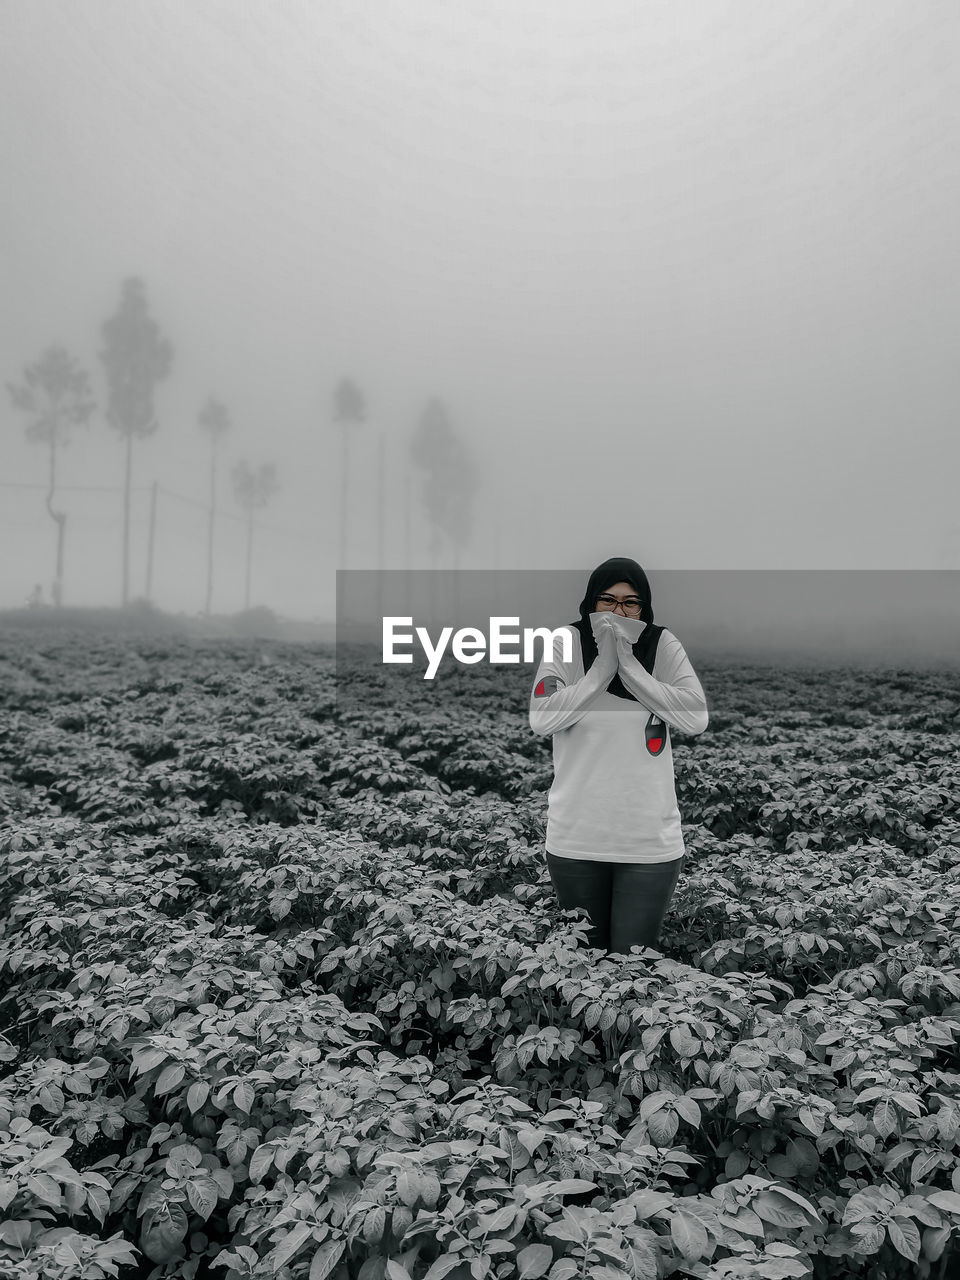 fog, one person, white, nature, land, winter, women, full length, black and white, adult, environment, clothing, standing, sky, snow, young adult, front view, mist, monochrome, cold temperature, female, monochrome photography, portrait, day, outdoors, lifestyles, sea, beauty in nature, landscape, copy space, horizon, plant, leisure activity, field, morning, childhood, looking at camera, child, emotion, person